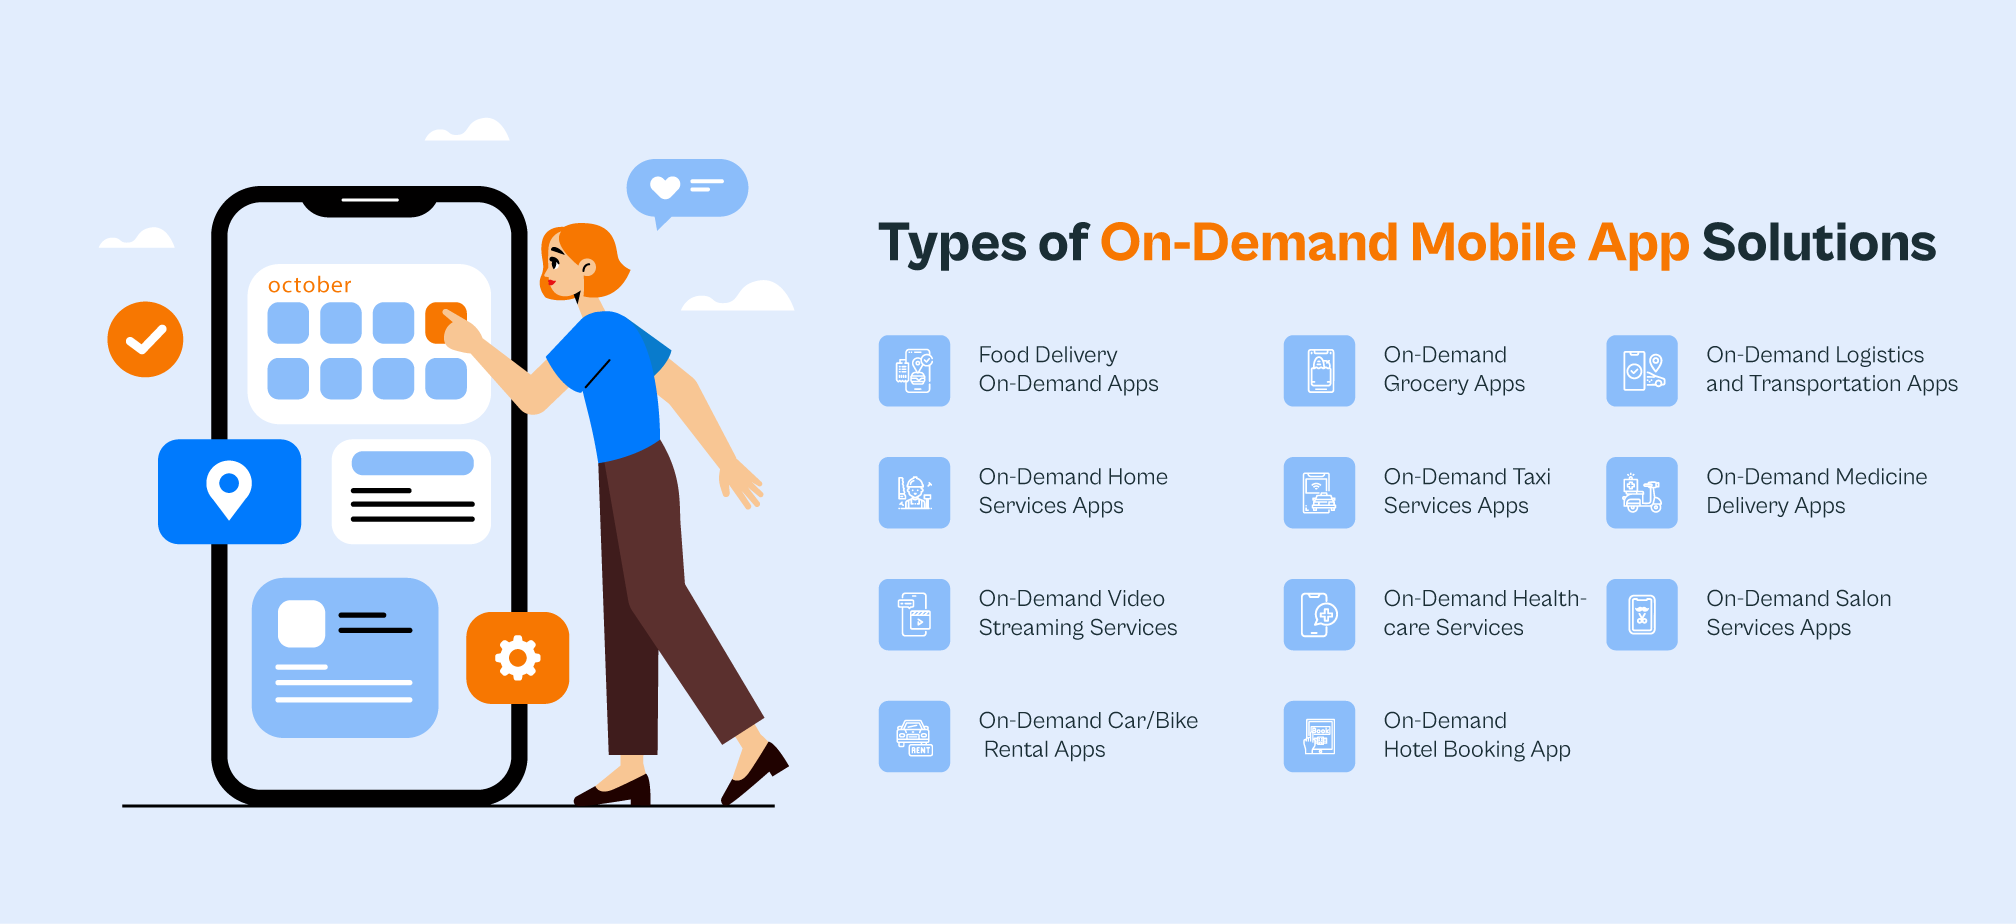 <img src="Types-of-On-Demand-Mobile-App-Solutions.png" alt="Types of On-Demand Mobile App Solutions">